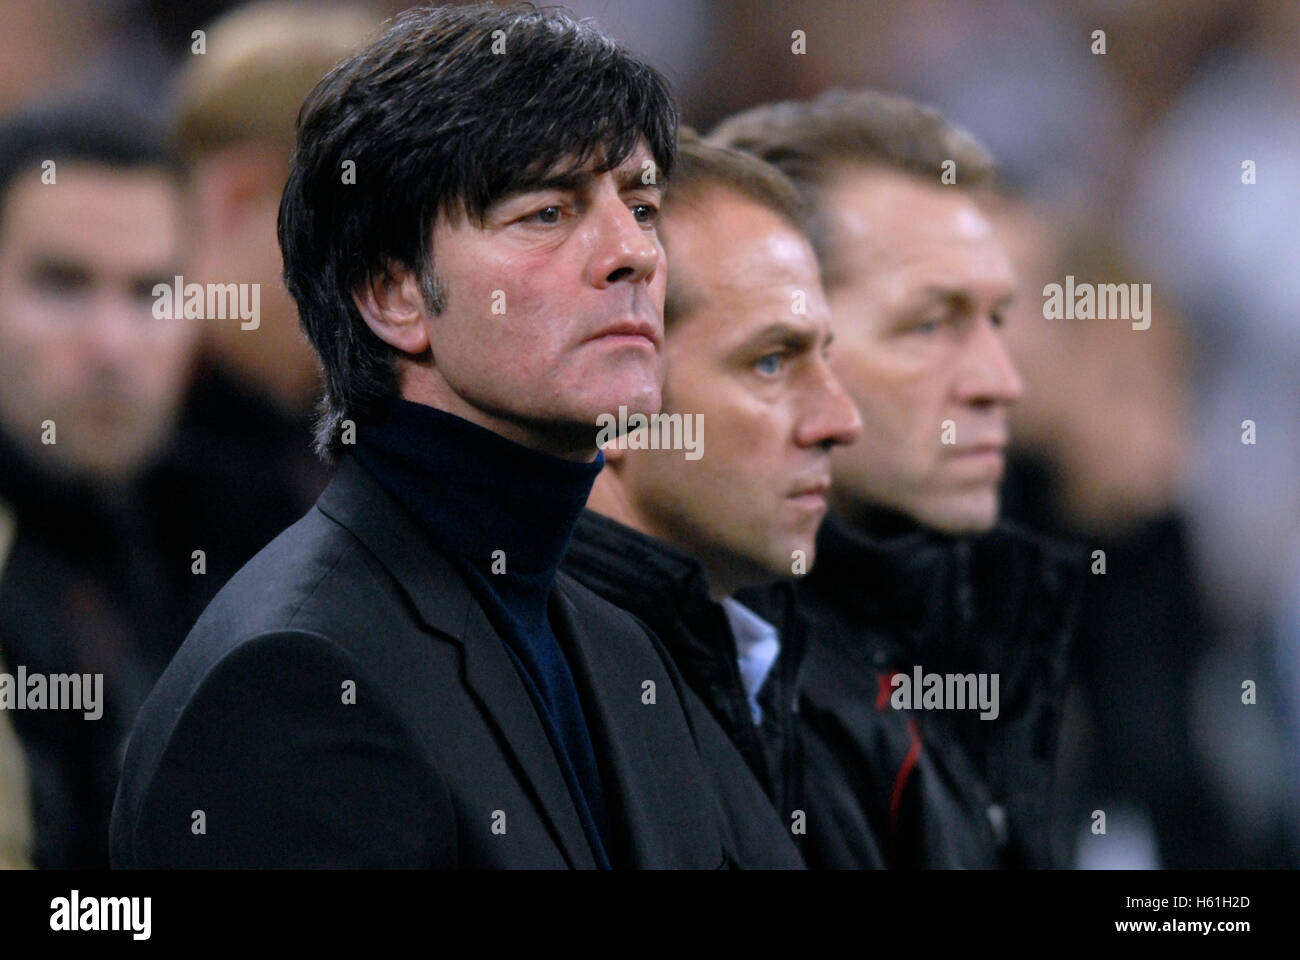 Joachim Loew, Hansi Flick and Andreas Koepke, view from left to right, soccer friendly game, Germany - Ivory Coast 2-2 at the Stock Photo